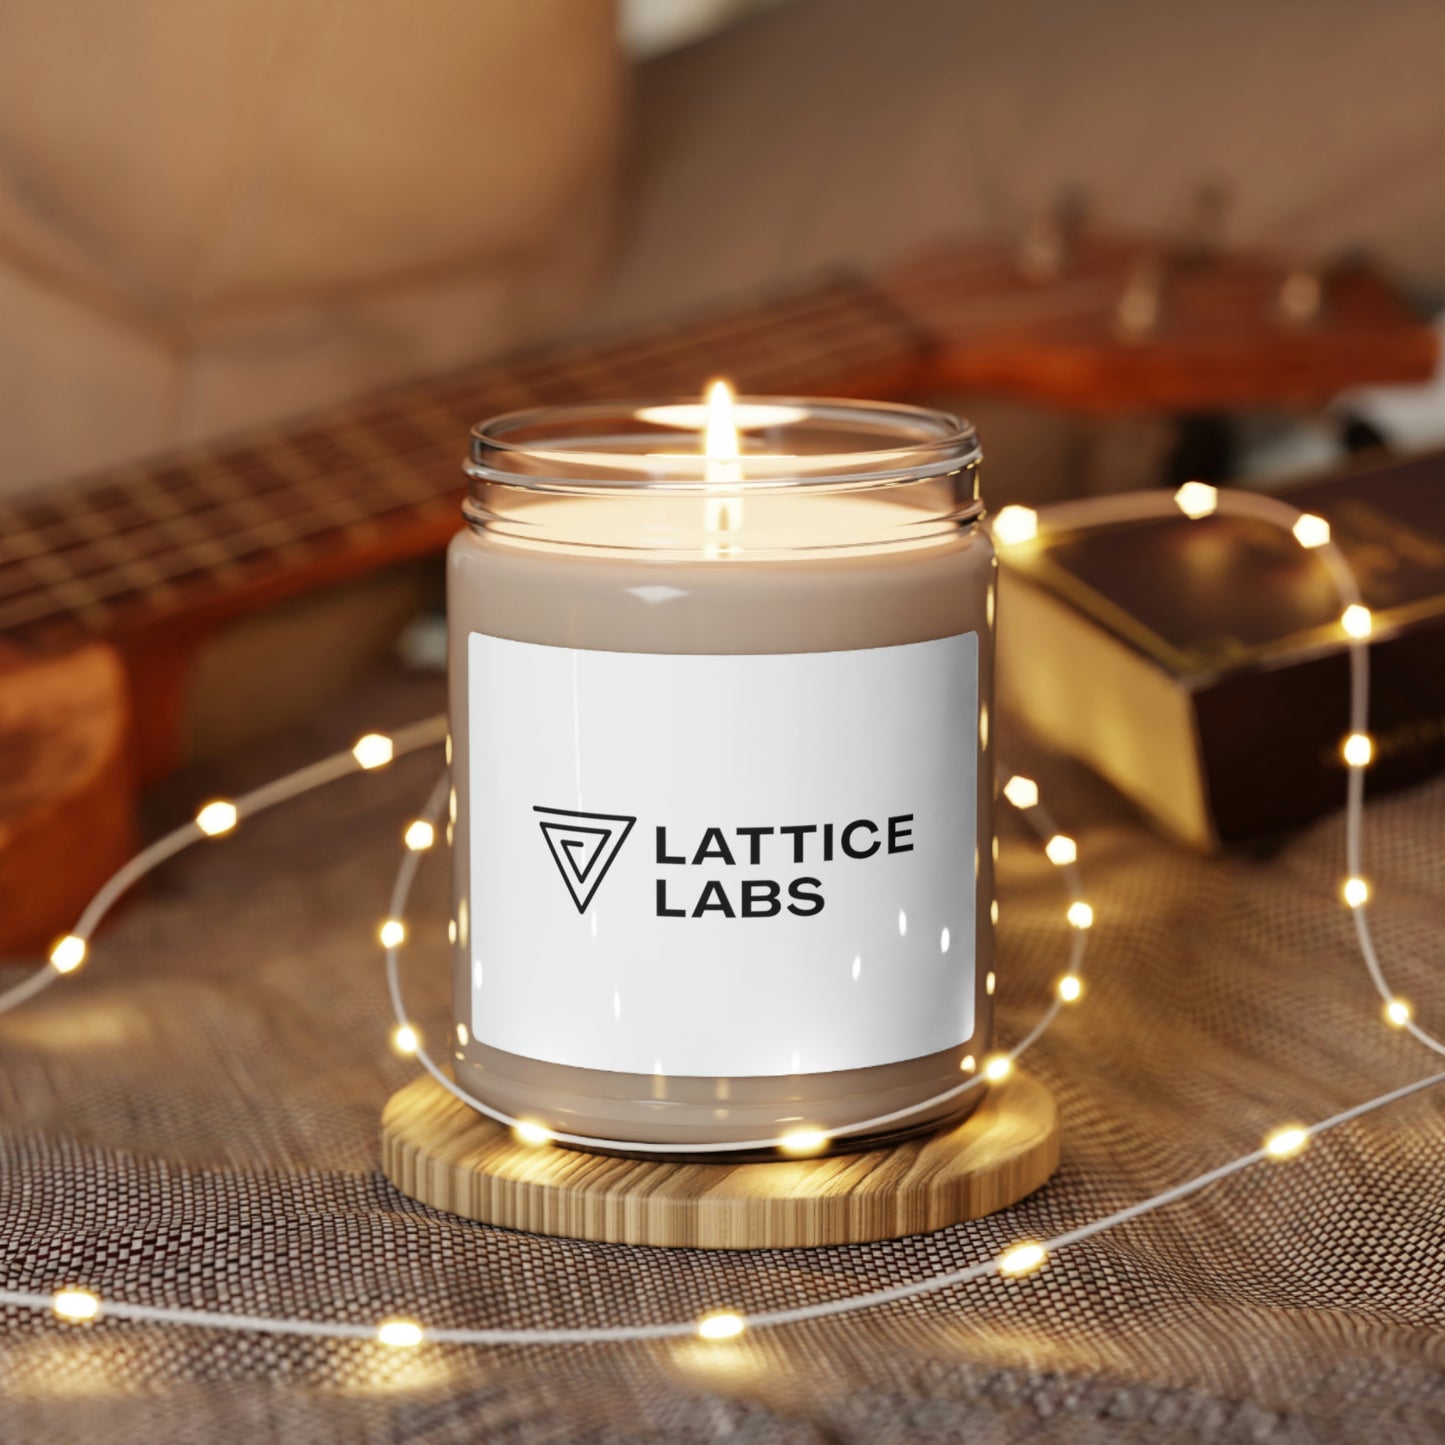 Lattice Labs Scented Soy Candle, 9oz